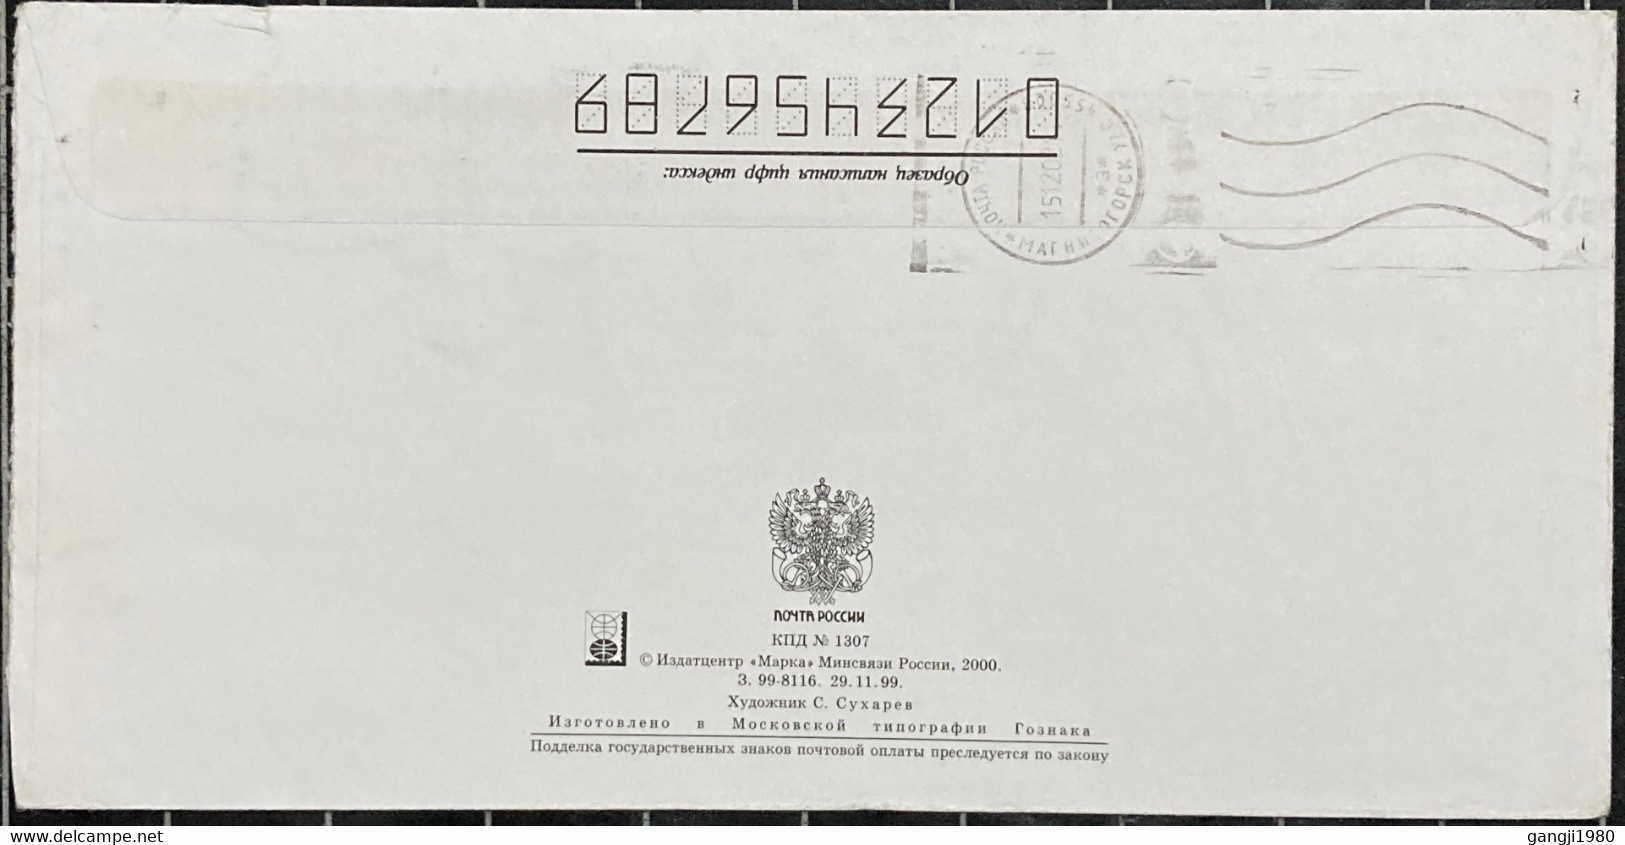 RUSSIA 2002, STATIONERY COVER USED TO GERMANY,RETURN TO SENDER LABEL,RAILWAY, BUILDING, MAGNITOGORSK TOWN CANCEL - Storia Postale